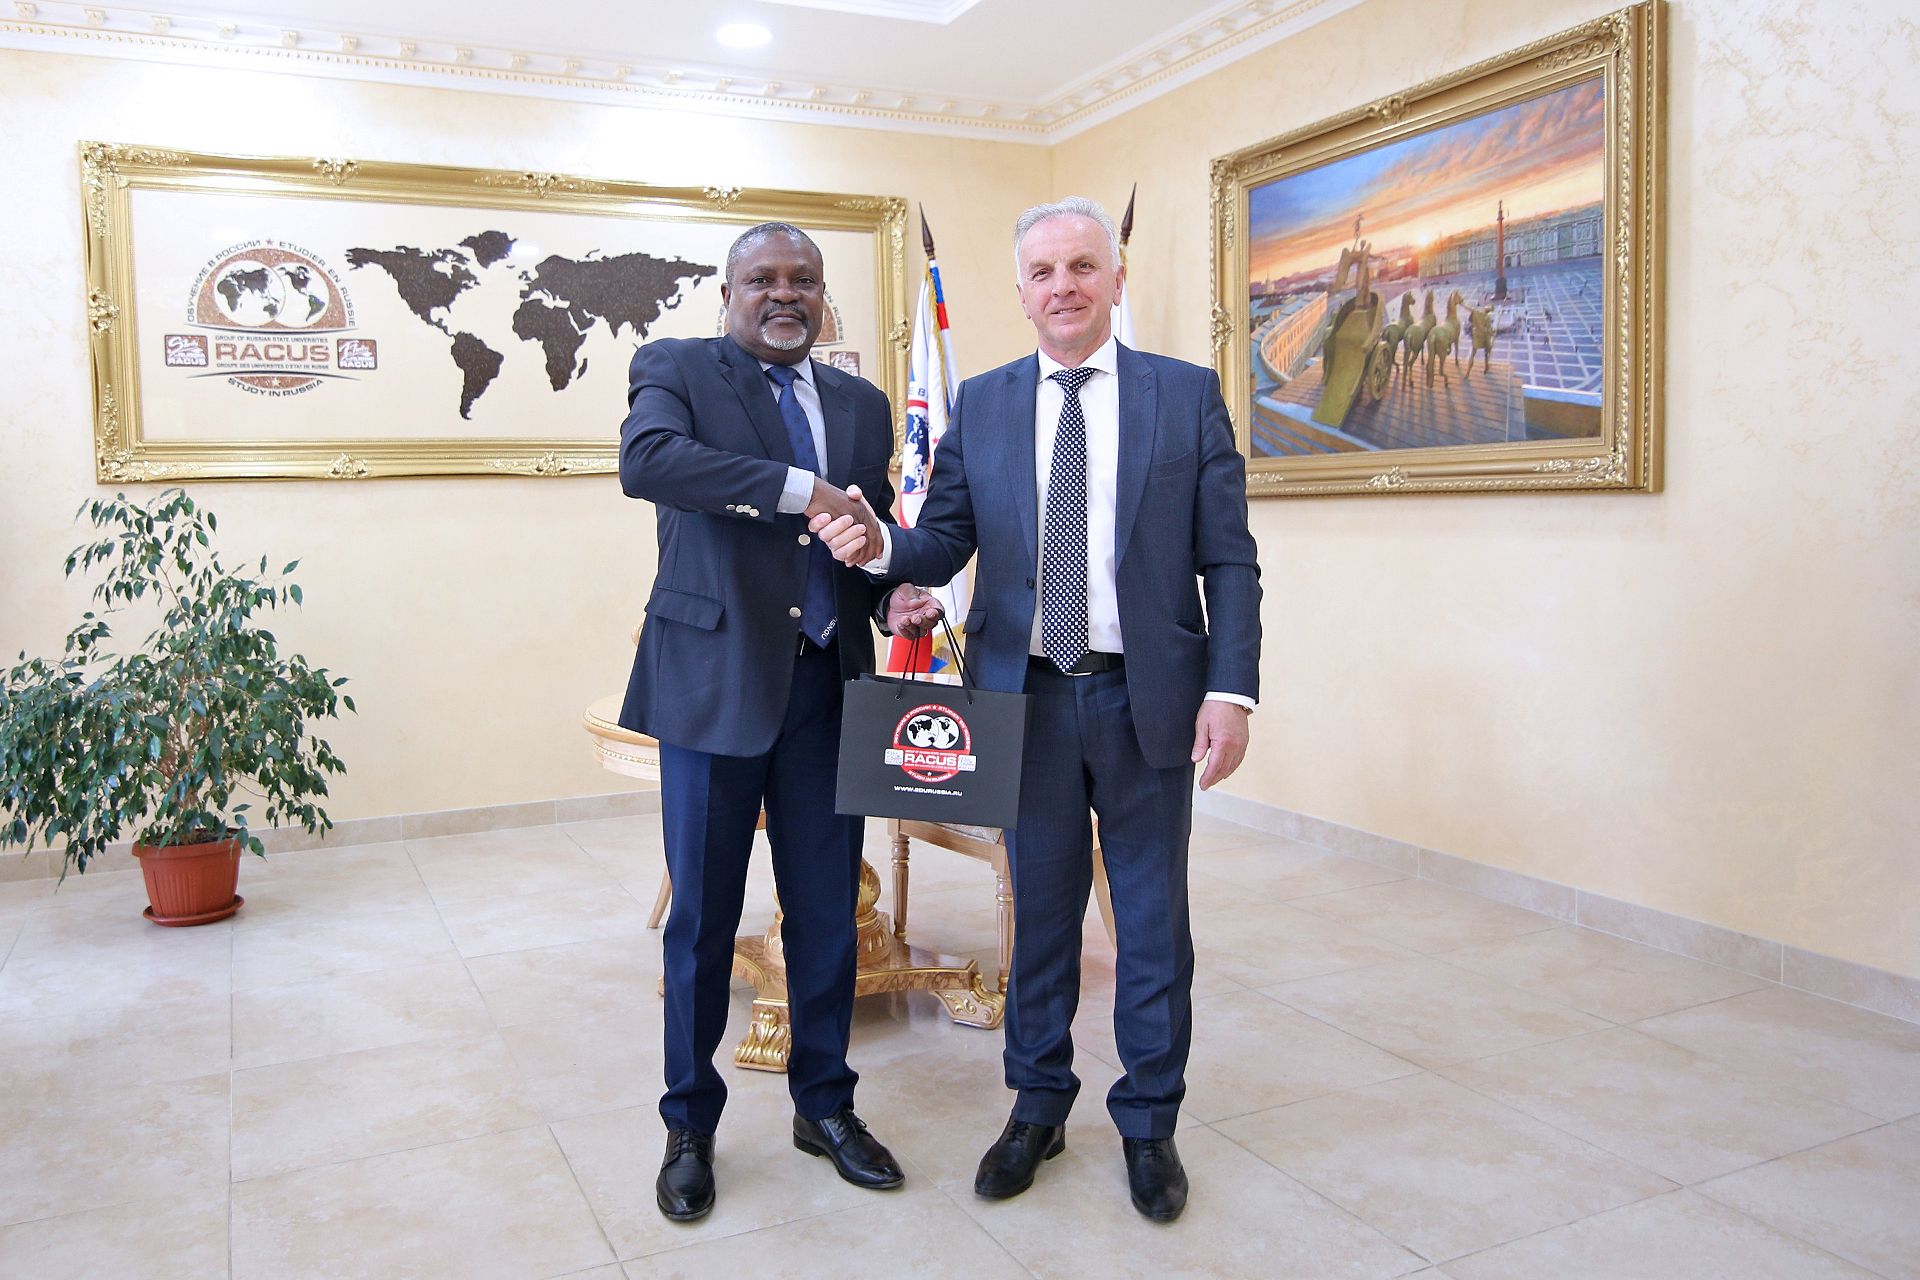 The meeting was held in a warm and friendly atmosphere. Both parties agreed to maintain and expand contacts for a closer and fruitful partnership.